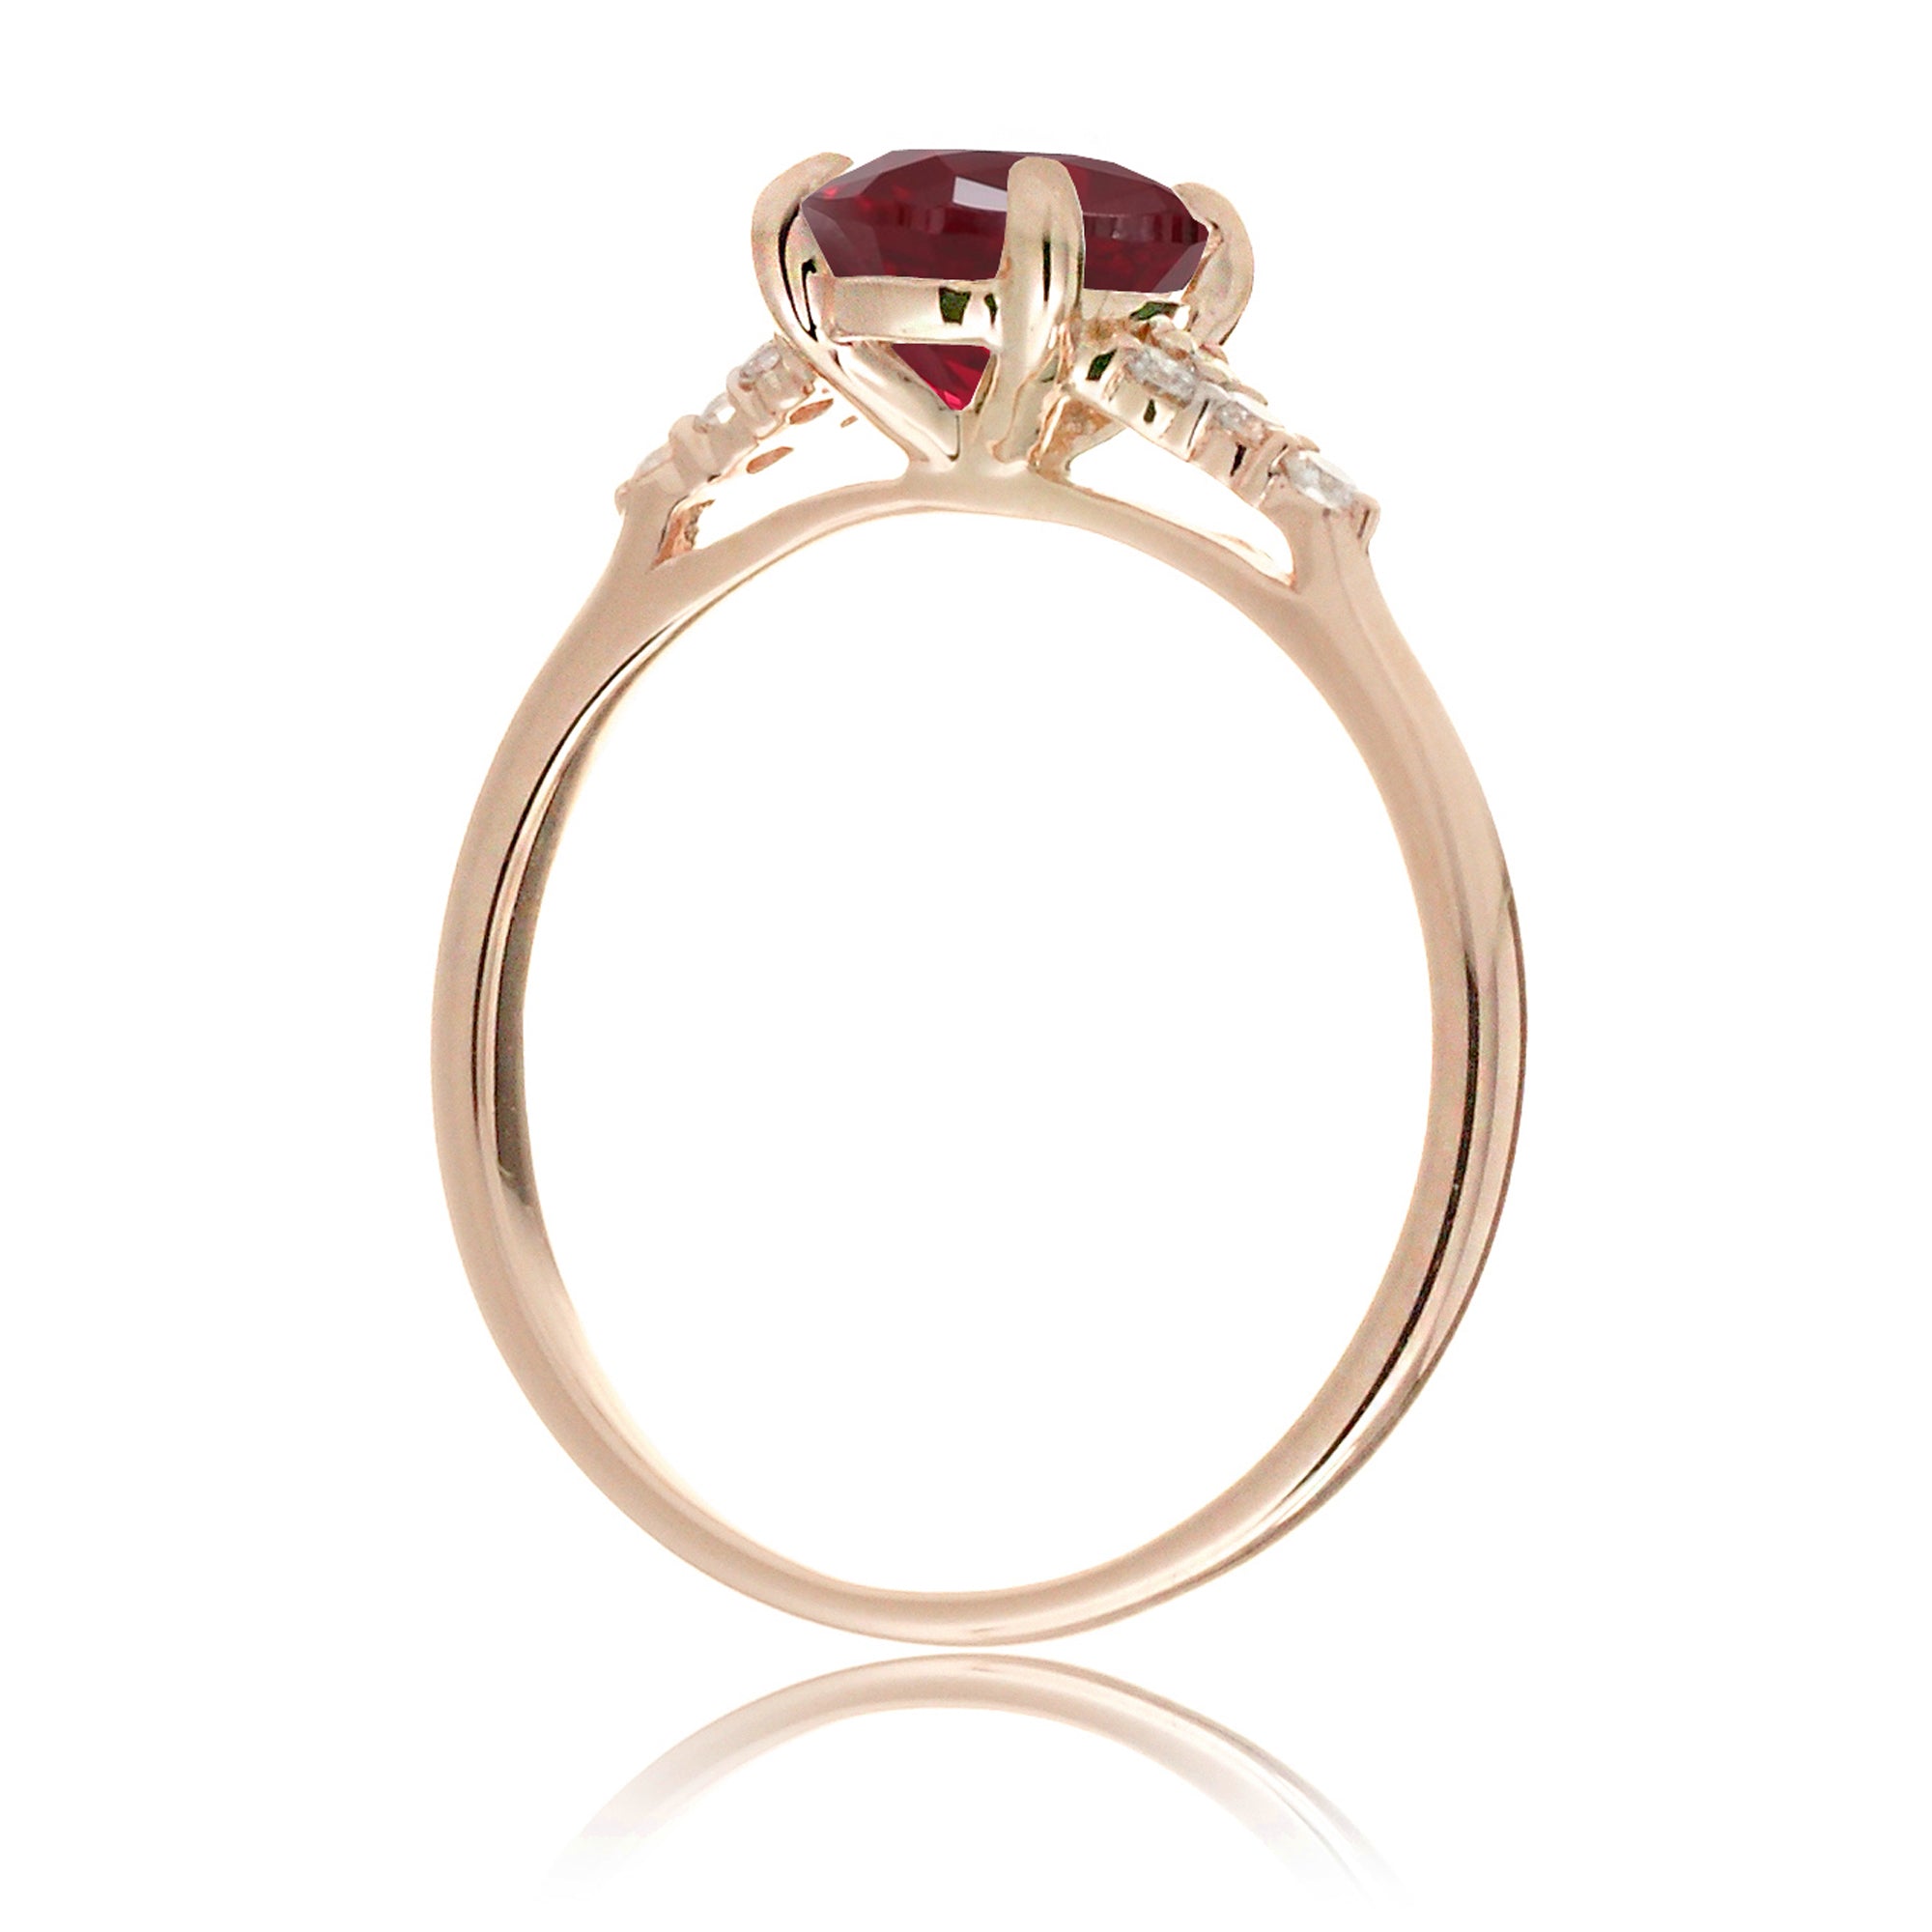 Ruby ring with princess cut and diamond accent in rose gold